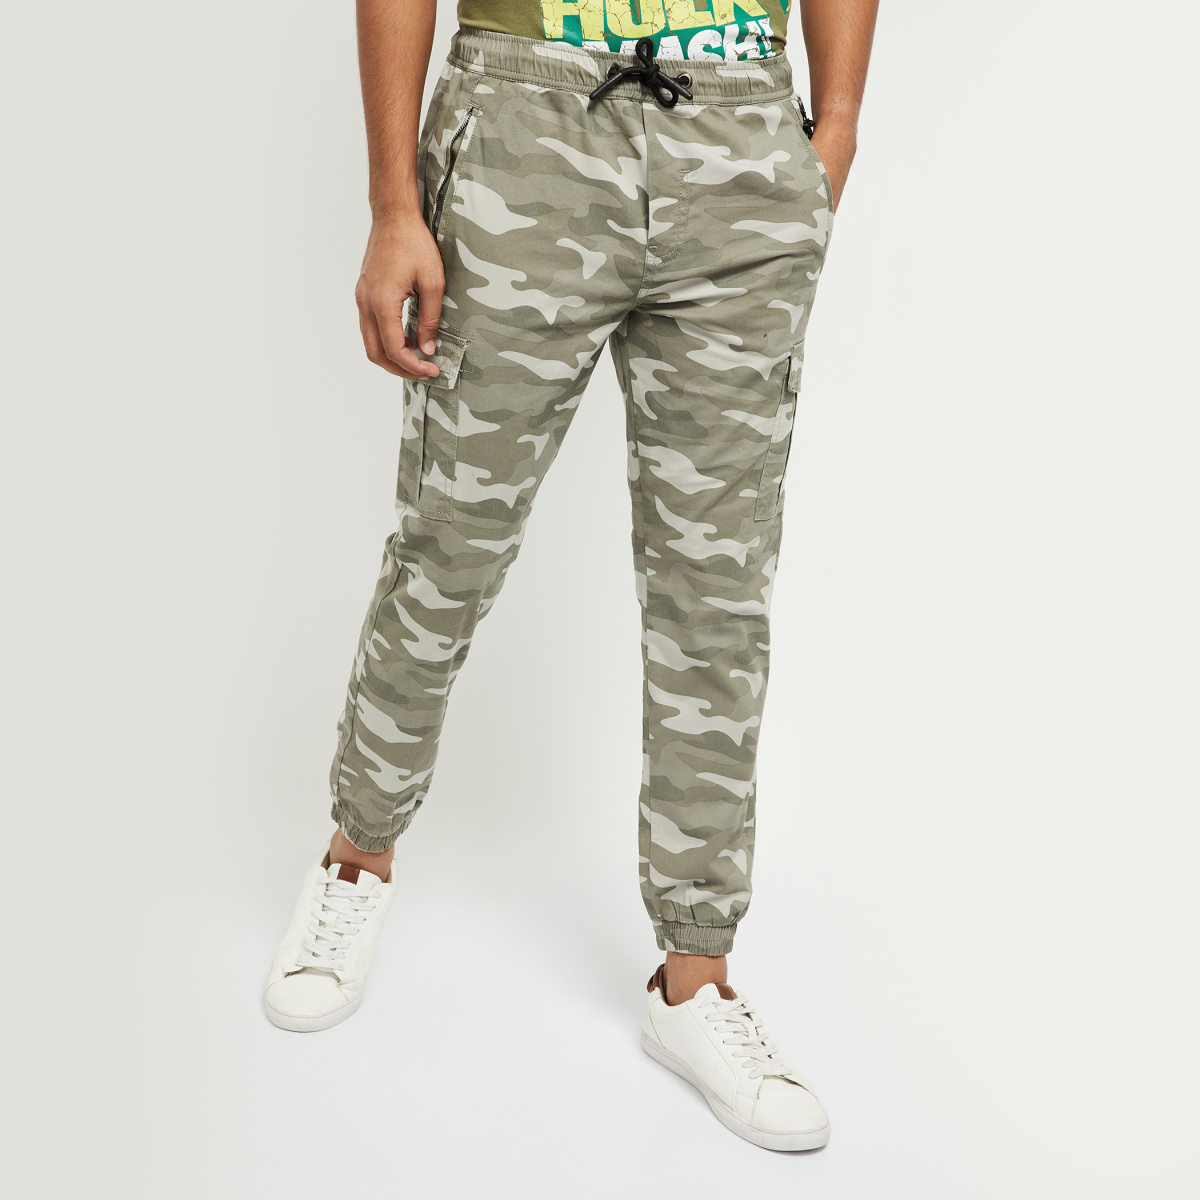 Men's Camouflage Cargo Pants by Erl | Coltorti Boutique